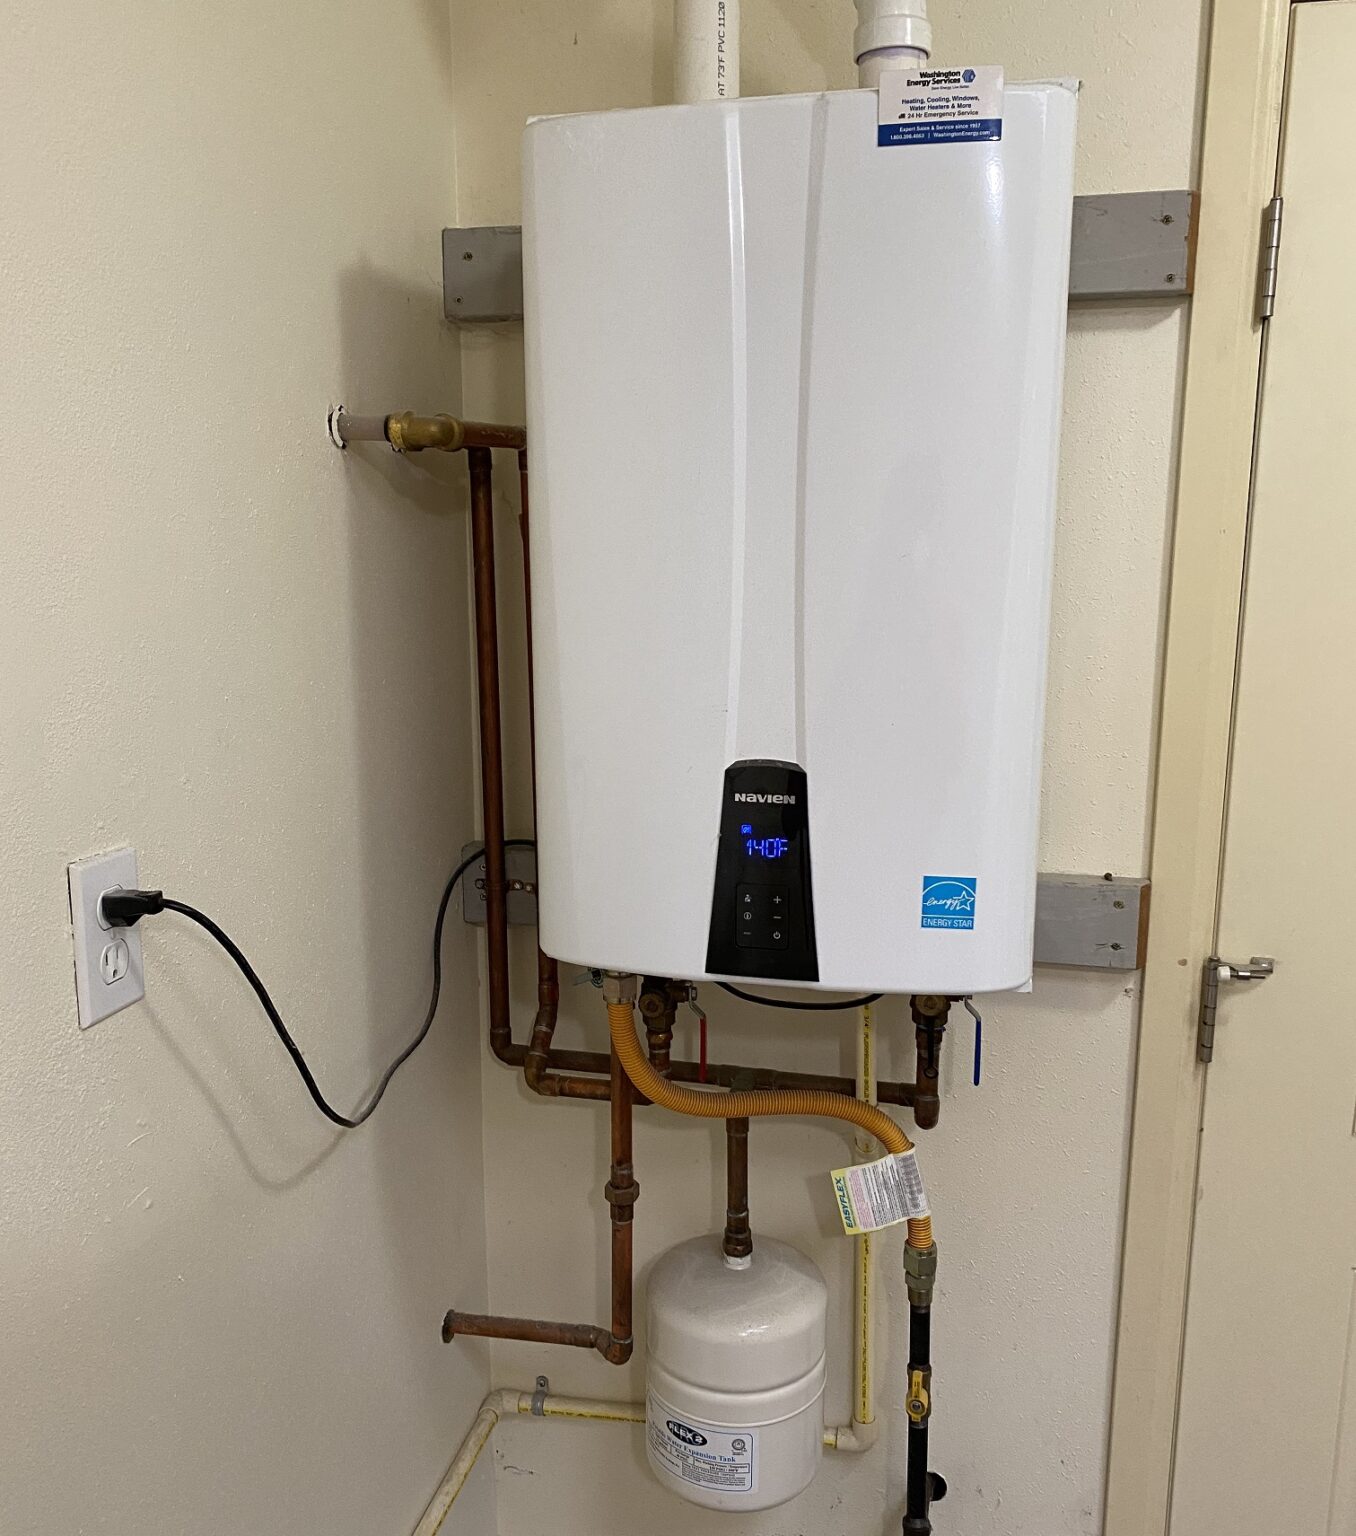 30 Gallon Electric Water Heater